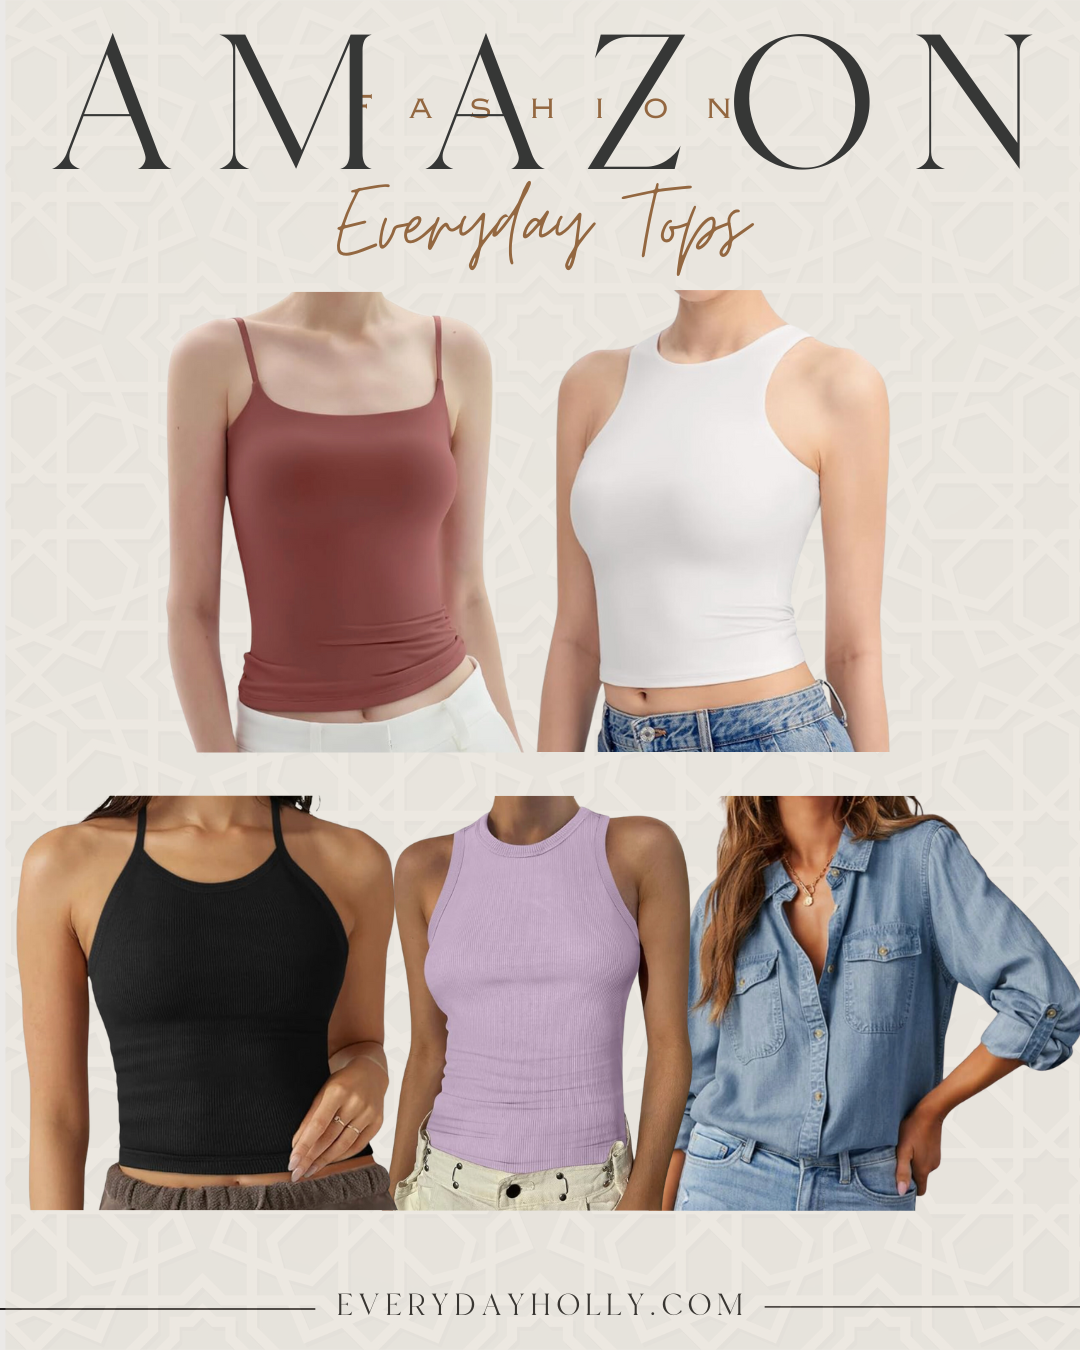 summer wardrobe essentials affordable everyday and casual outfit ideas | summer, summer outfit, everyday outfit, casual outfit, amazon, everyday top, tank top, bra tank top, denim shirt, chambray shirt